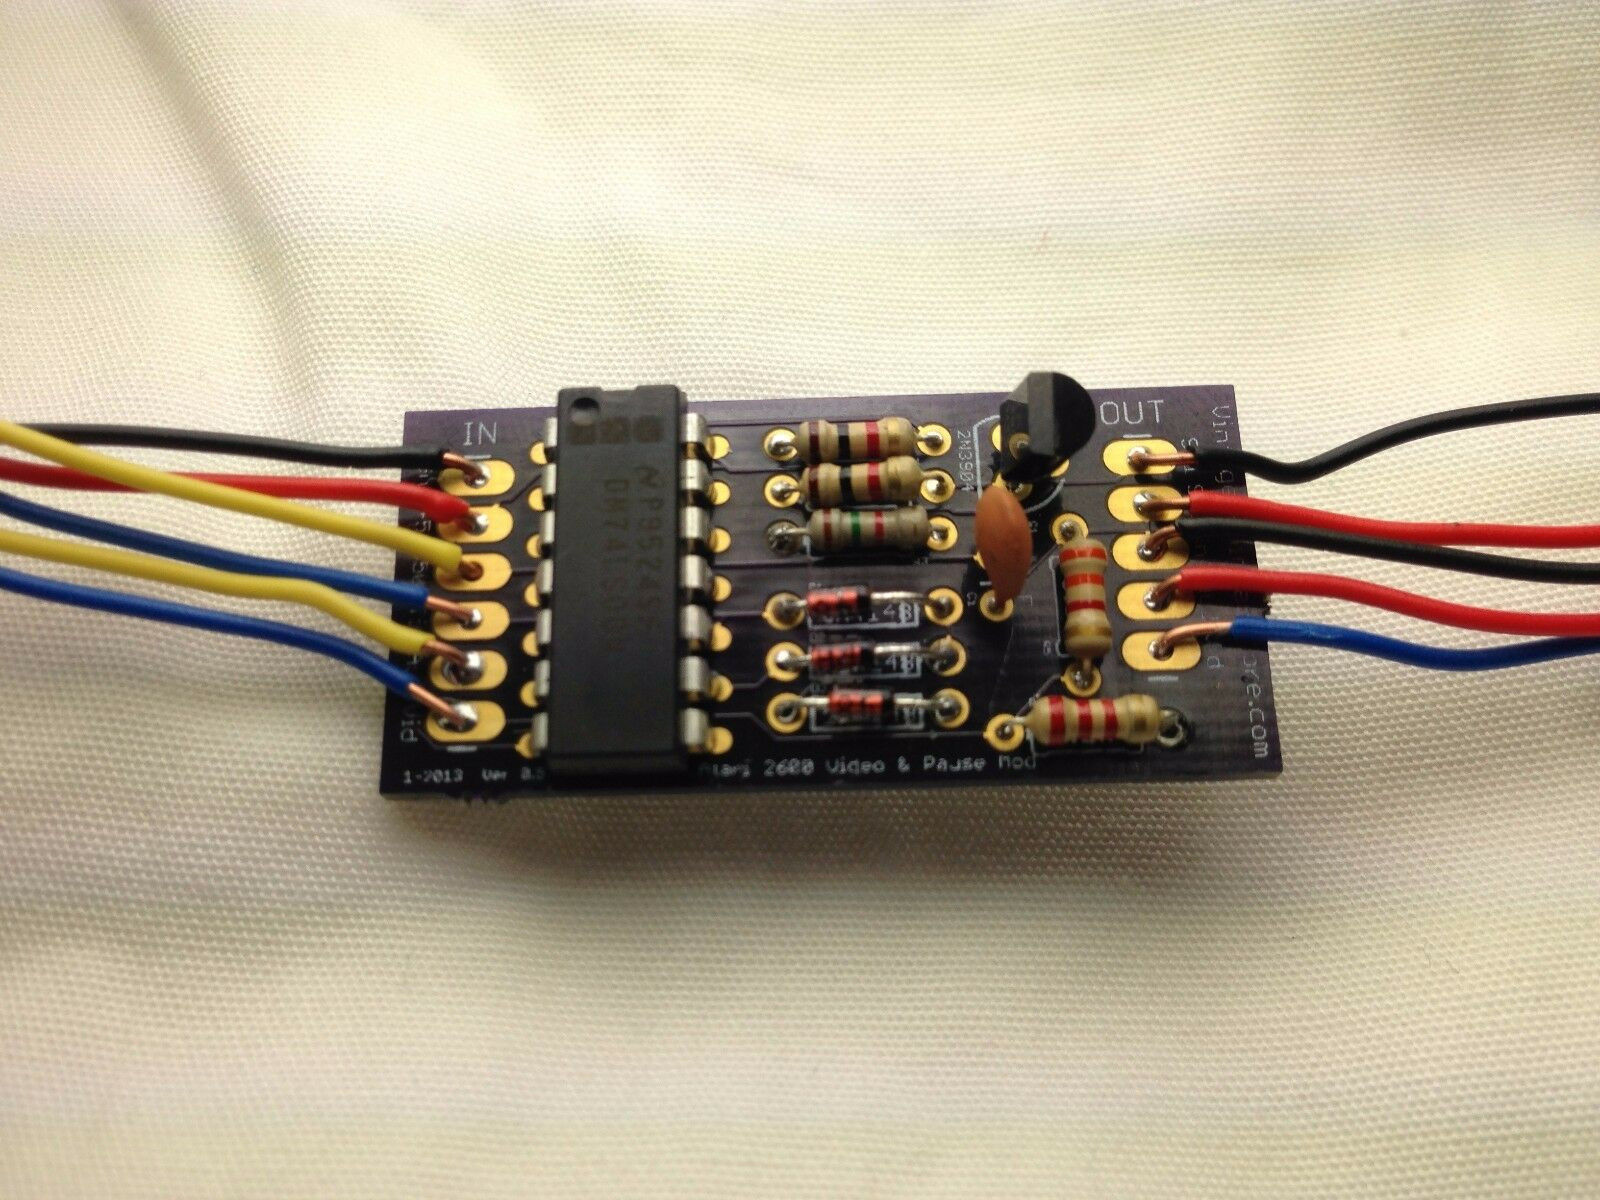 Best ideas about DIY Mod Kit
. Save or Pin Atari 2600 posite Video Pause Mod Upgrade bo Kit Now.